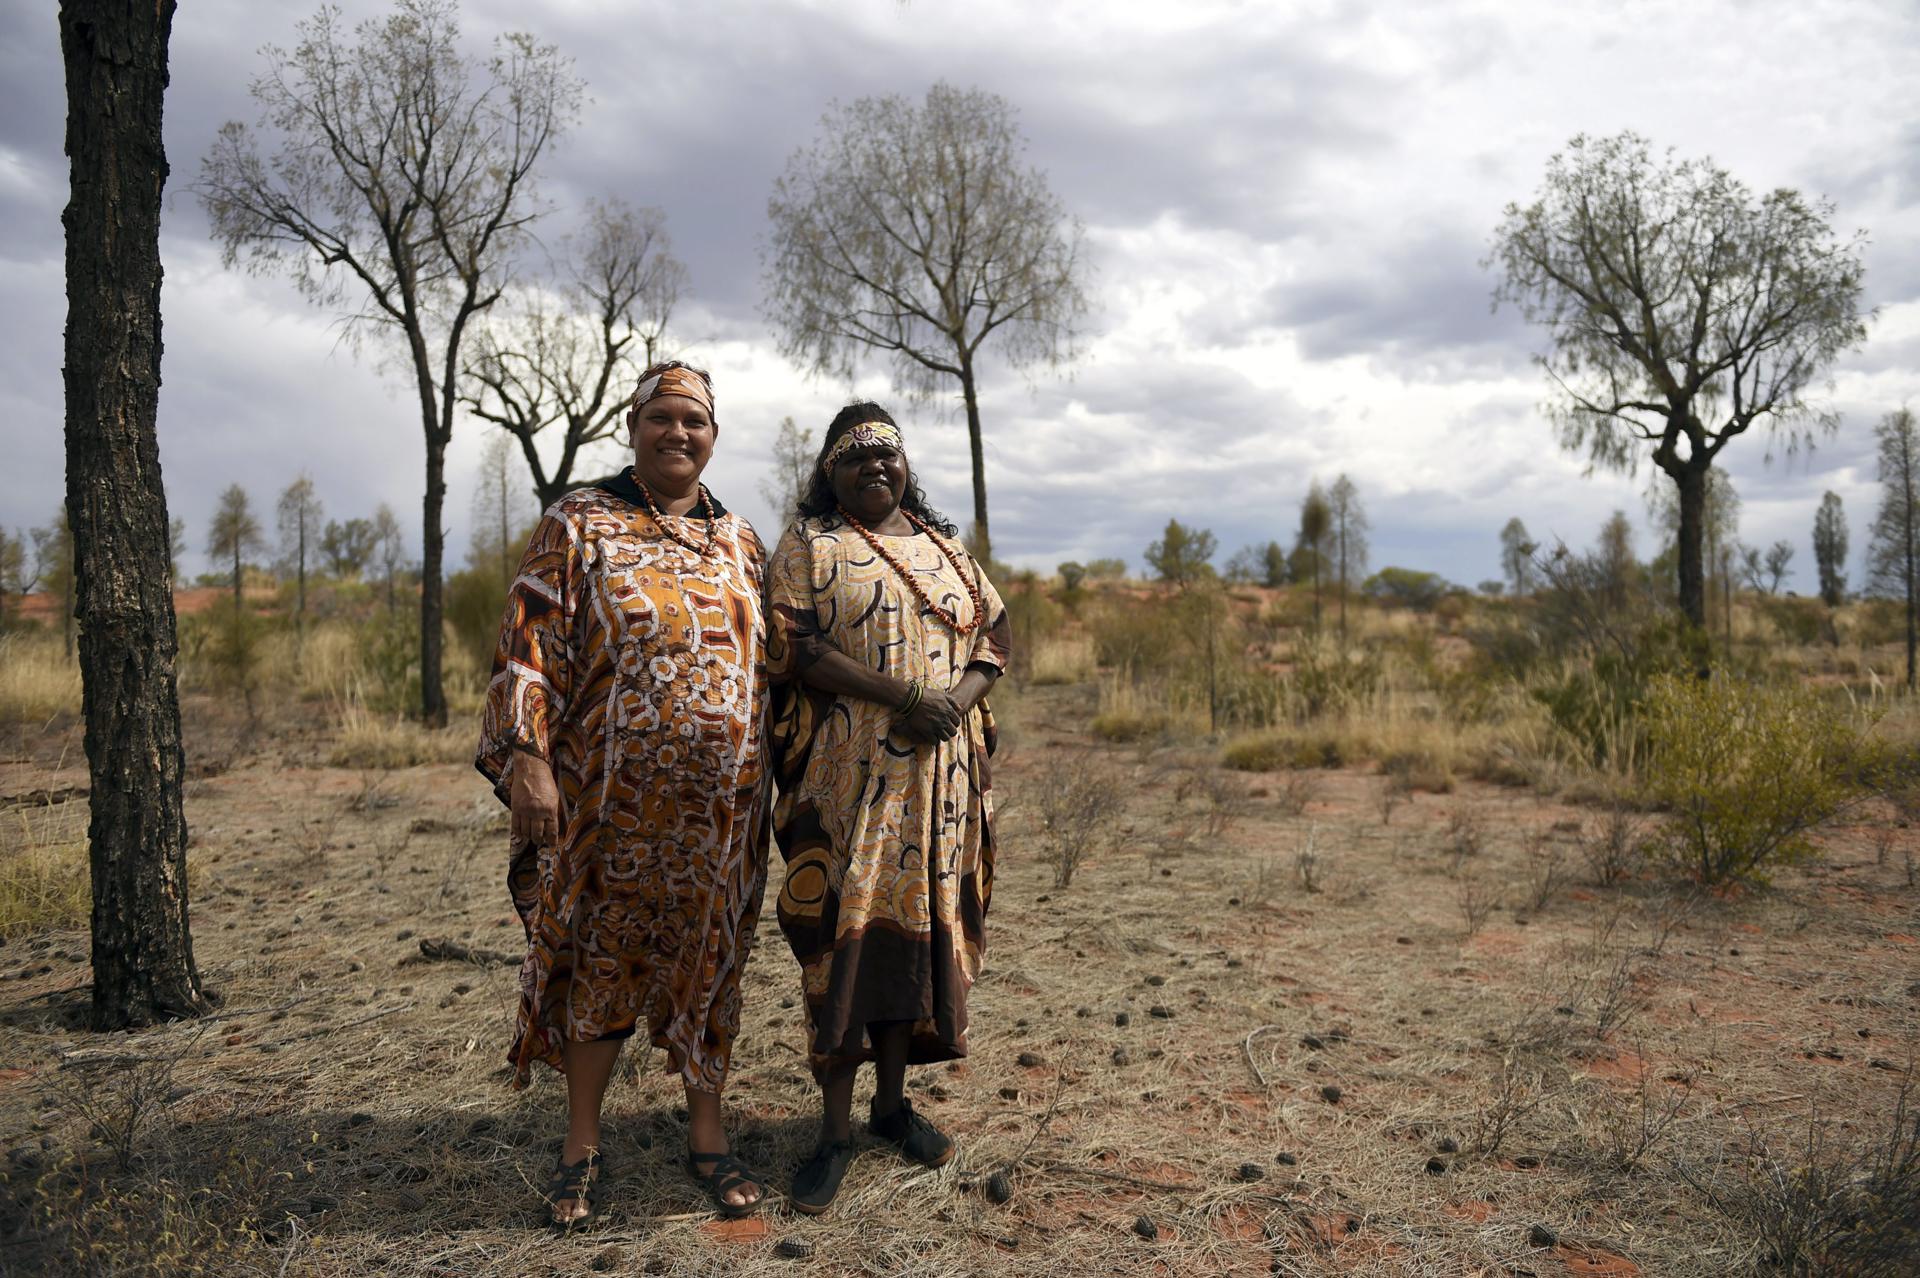 A picture made available on 26 October 2015 shows Aboriginal women Marion Swift from the community of Hermannsburg (L) and Carolyn Windy of the Areyonga community, posing for photos as they wait to perform at a cultural event near Uluru, also known as Ayres Rock, in the Northern Territory, Australia, 25 October 2015. EFE-EPA/DAN PELED AUSTRALIA AND NEW ZEALAND OUT[AUSTRALIA AND NEW ZEALAND OUT]/FILE